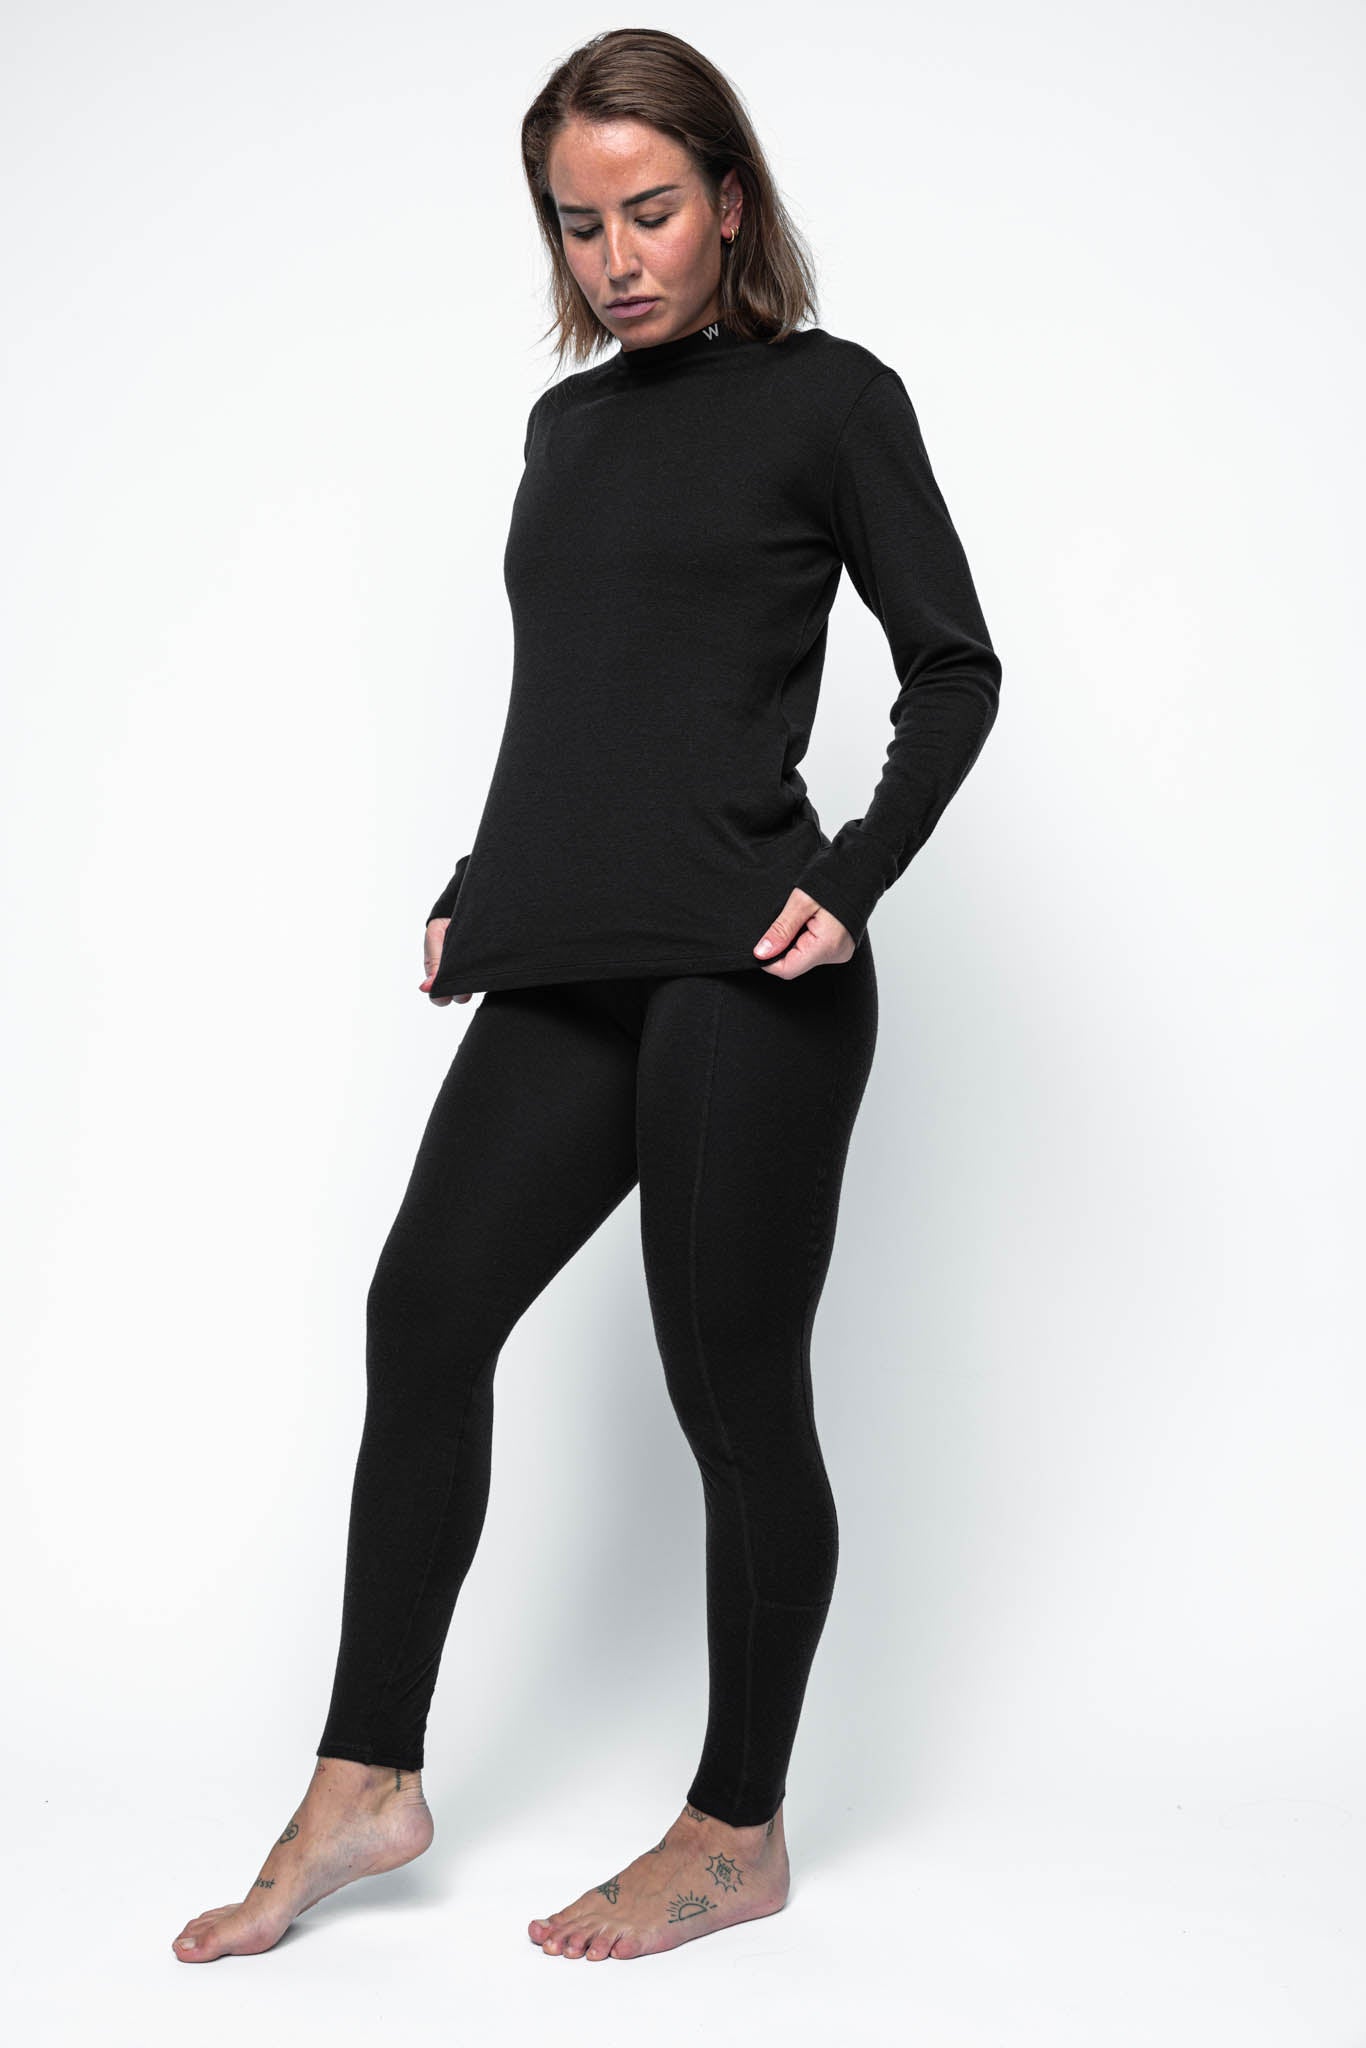 Wool Thermal Base Layer Set: Womens Spring Thermal Underwear With Long Johns,  Warmth & Comfort 231211 From Diao03, $45.75